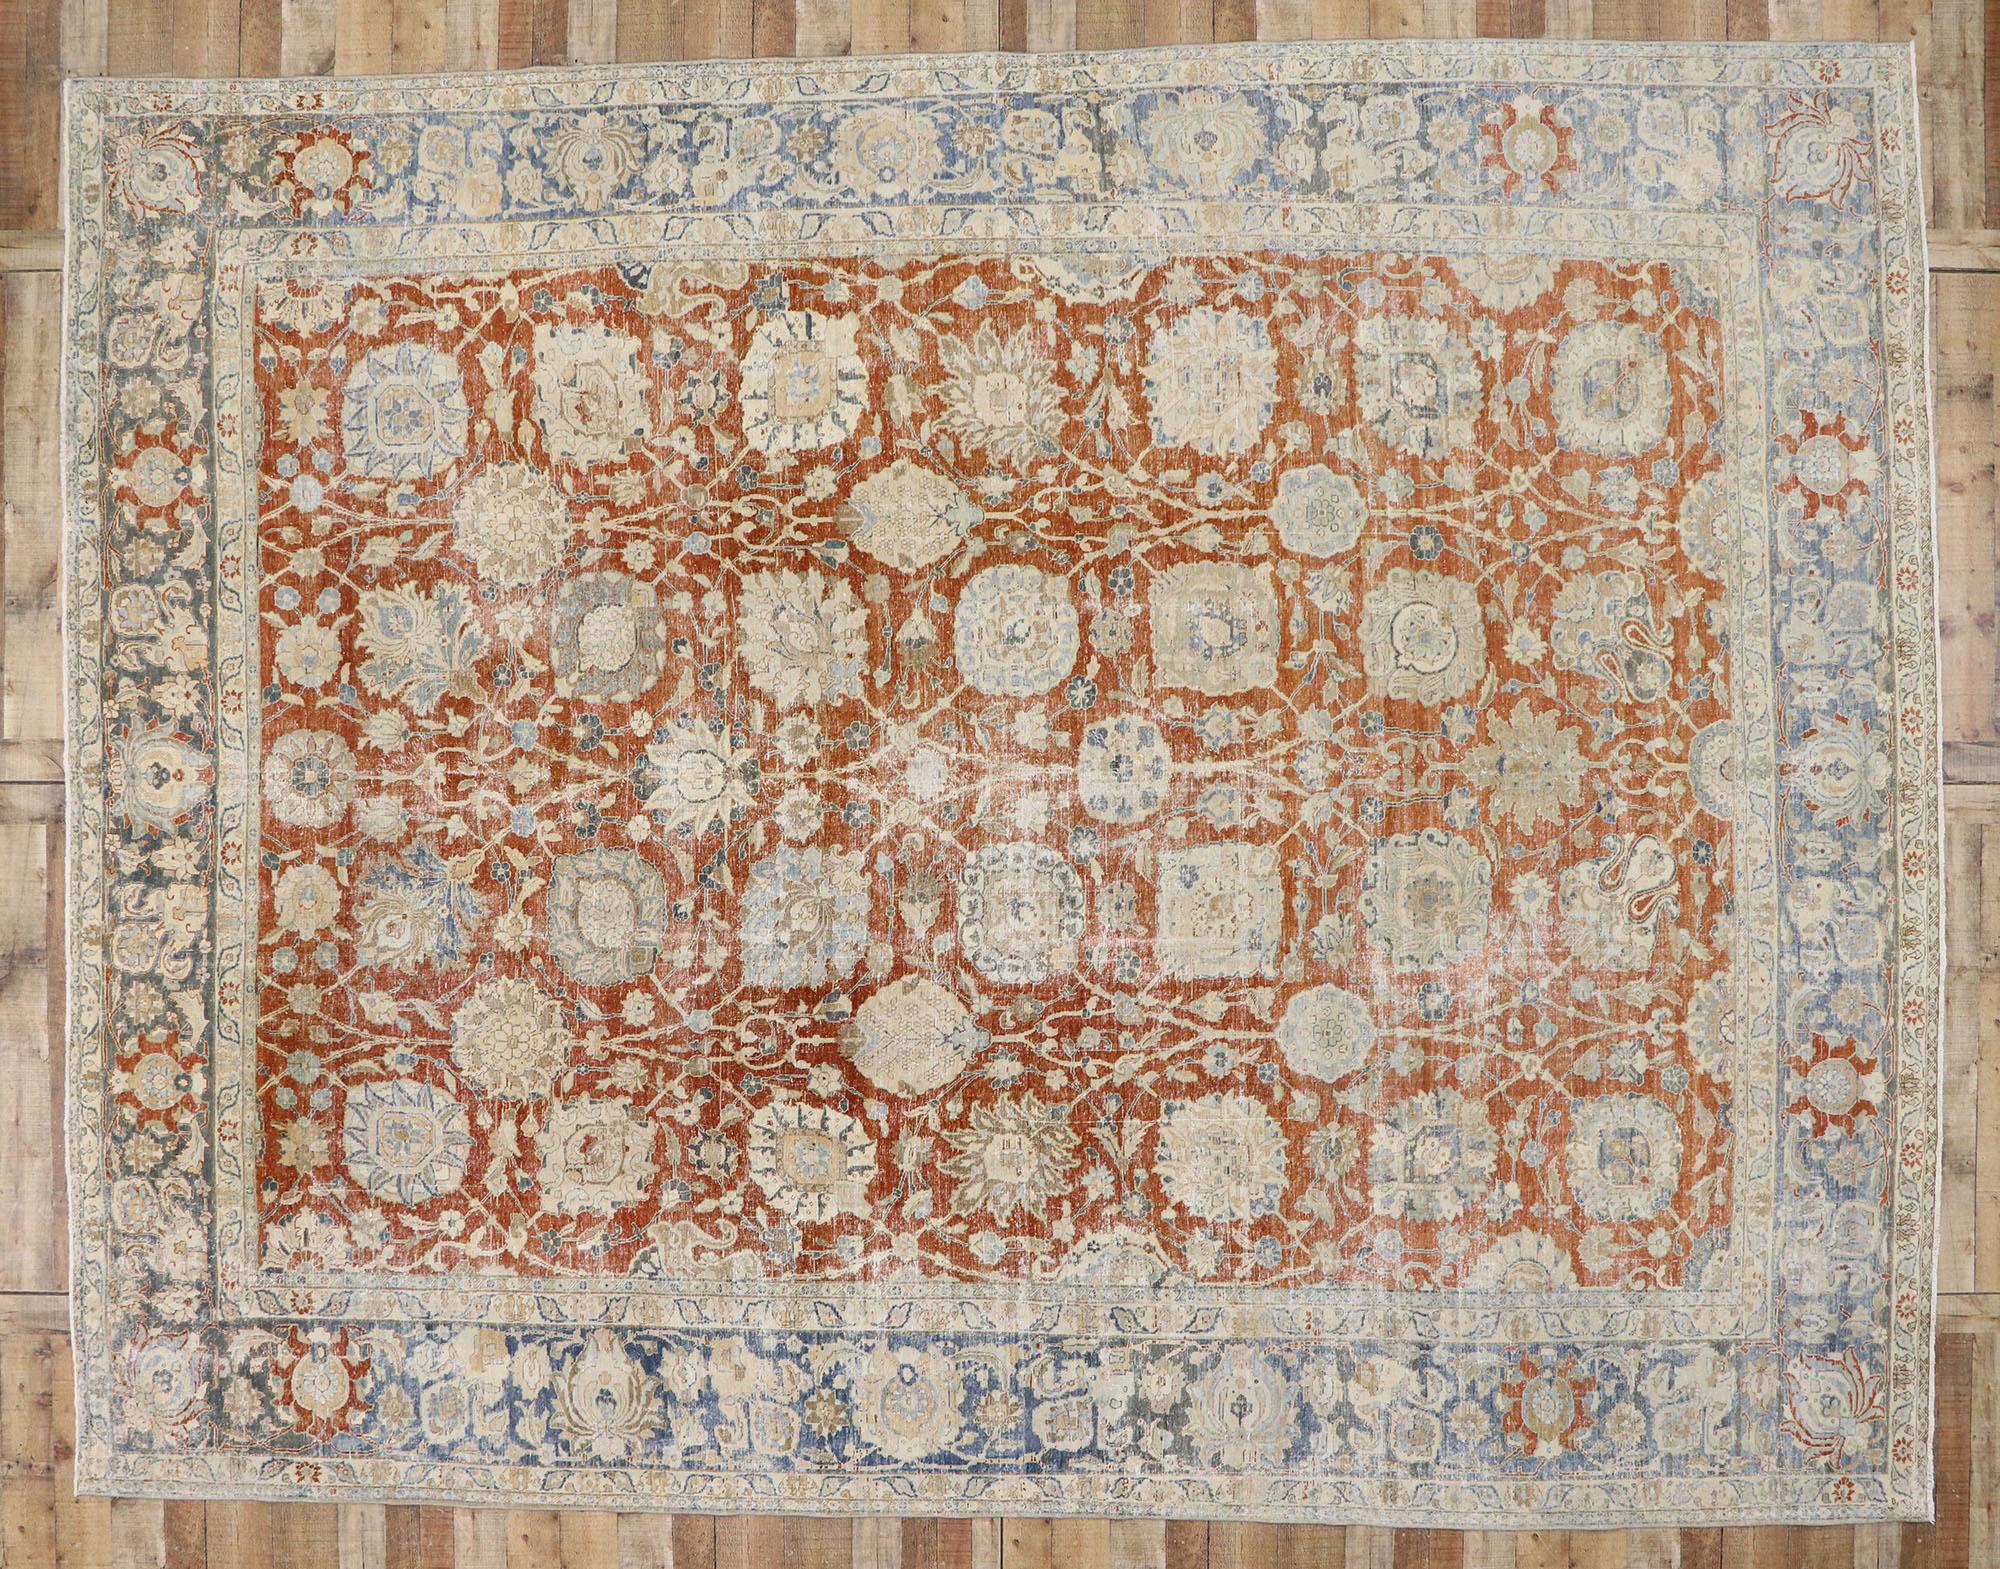 Distressed Antique Persian Tabriz Rug with Rustic Colonial Style 3